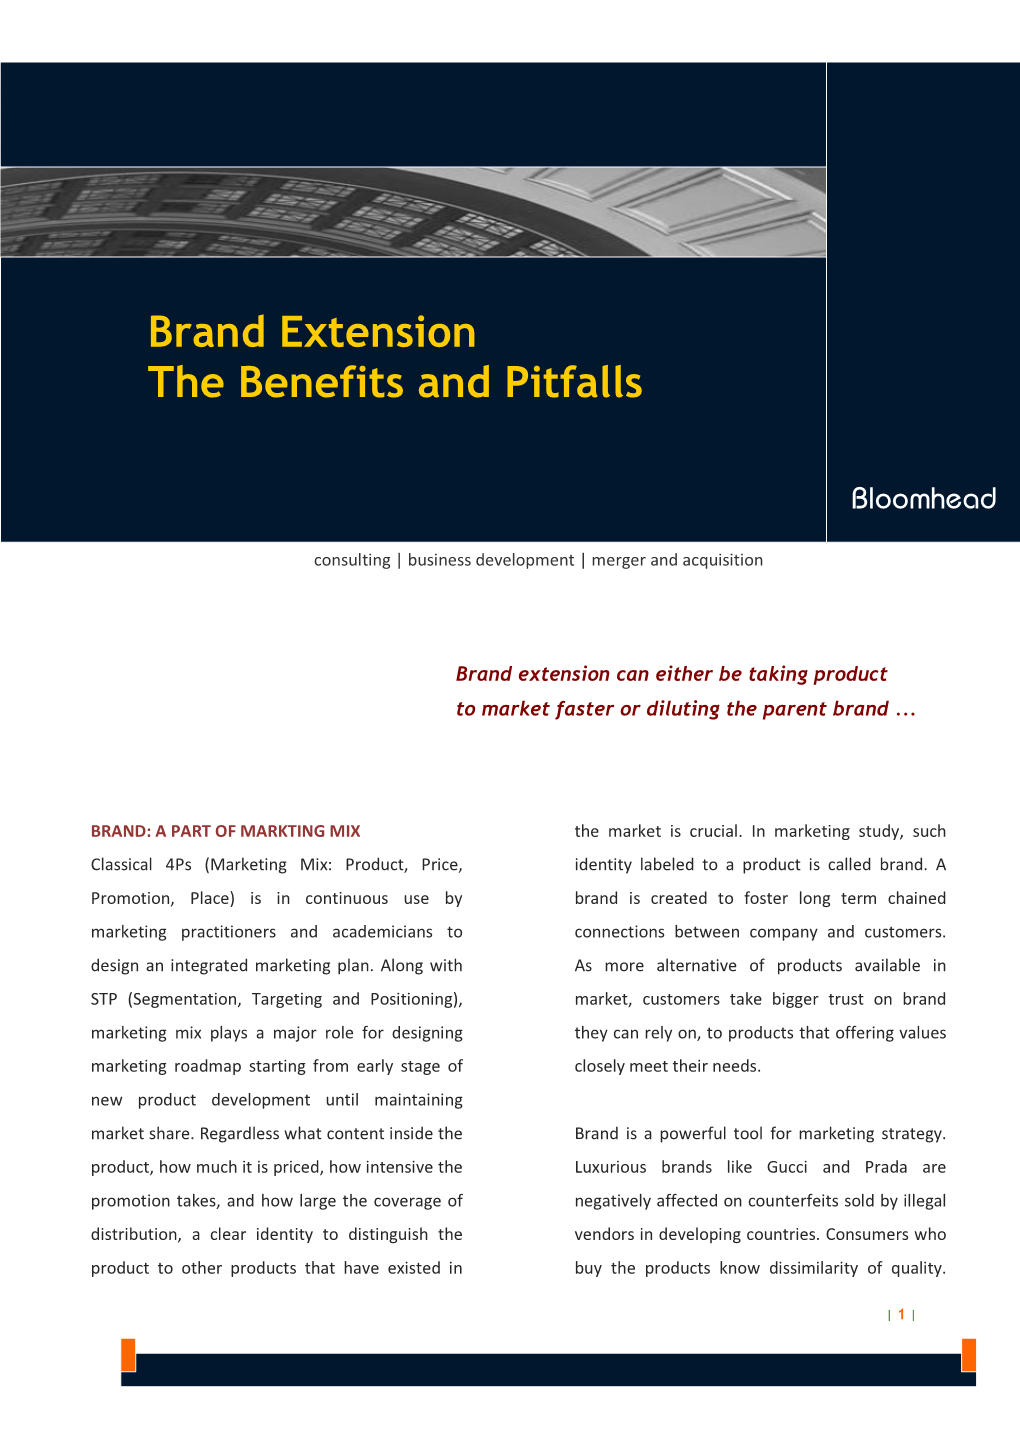 Brand Extension the Benefits and Pitfalls